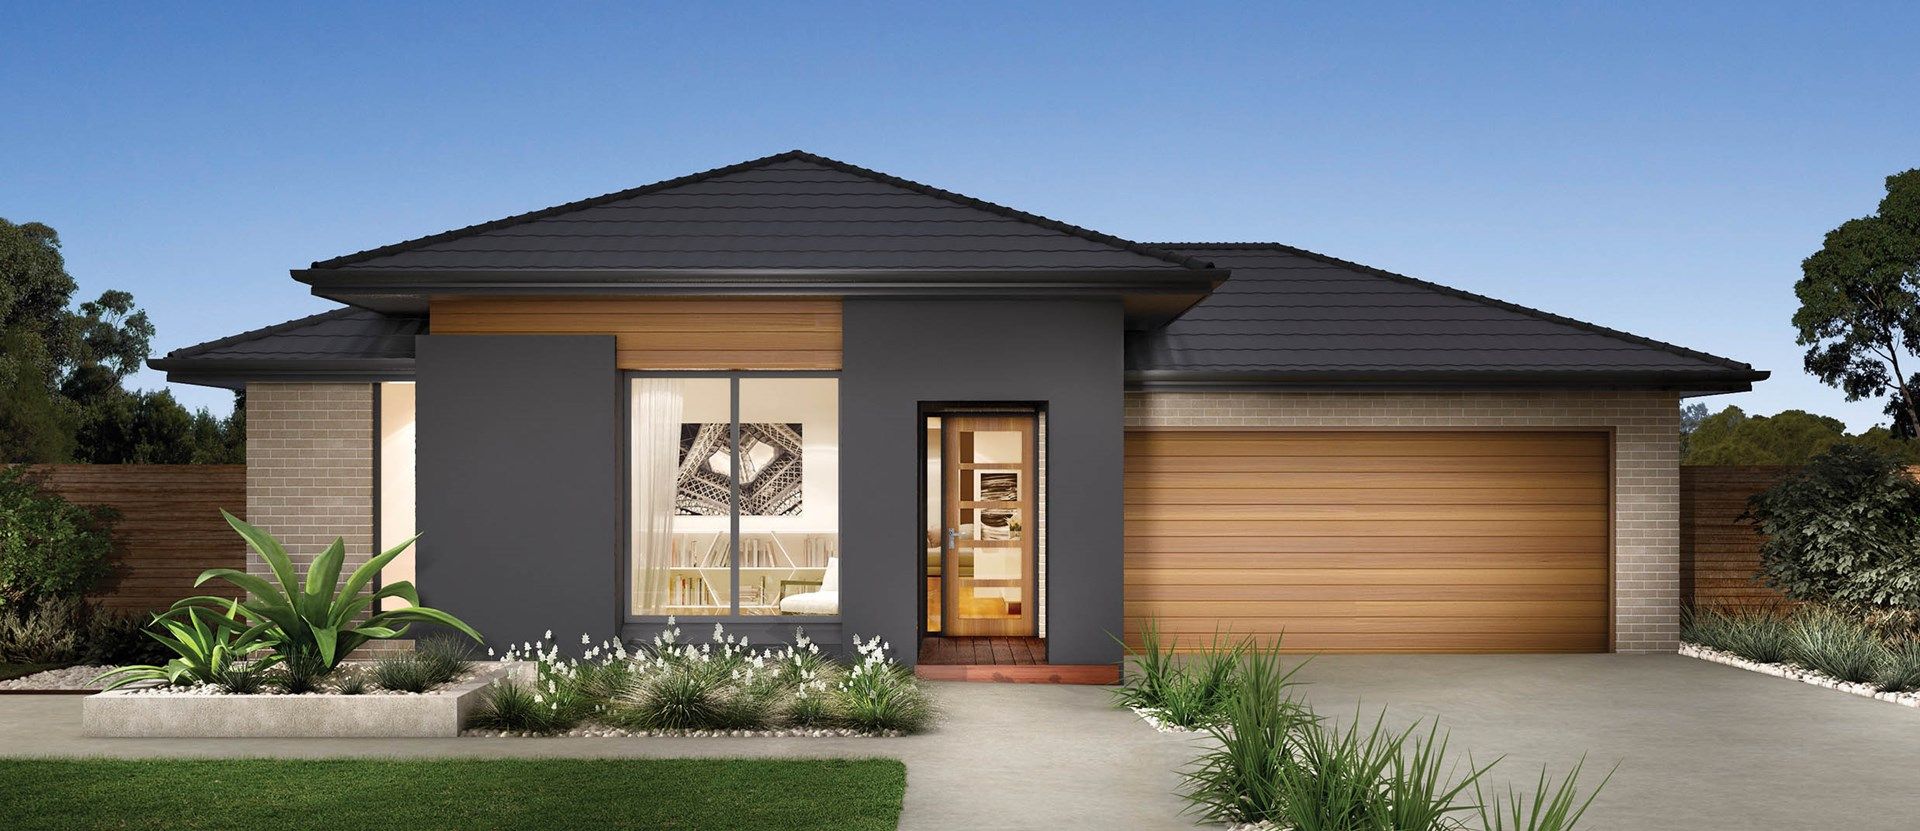 4 bedrooms New House & Land in Voyager Parade Clyde North, Lot: 229 CLYDE VIC, 3978